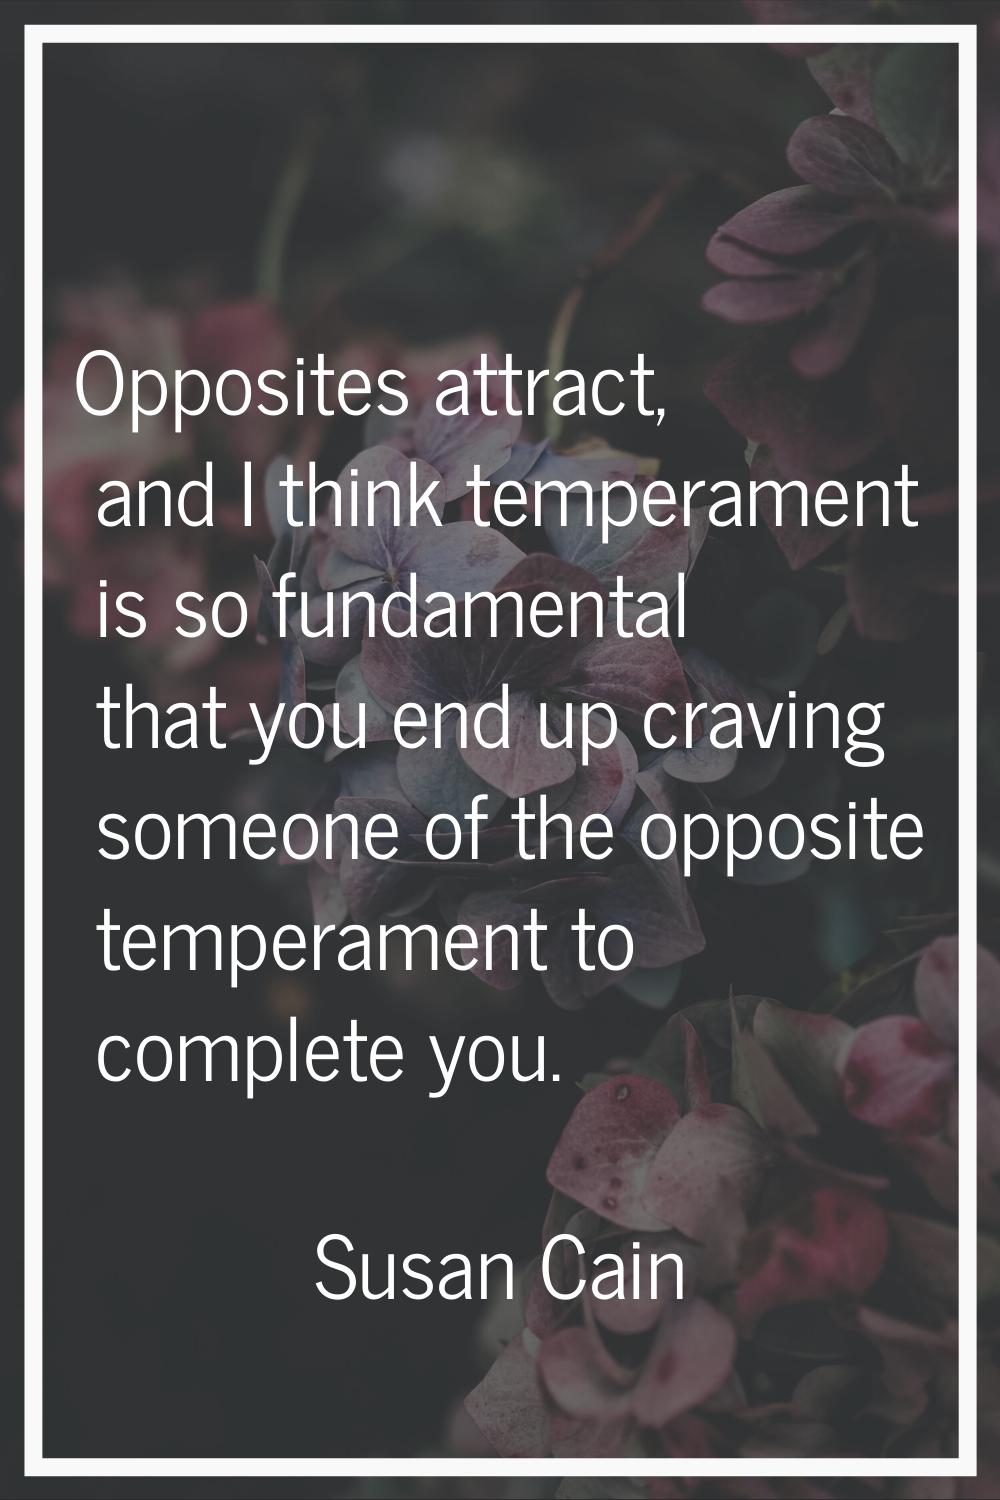 Opposites attract, and I think temperament is so fundamental that you end up craving someone of the